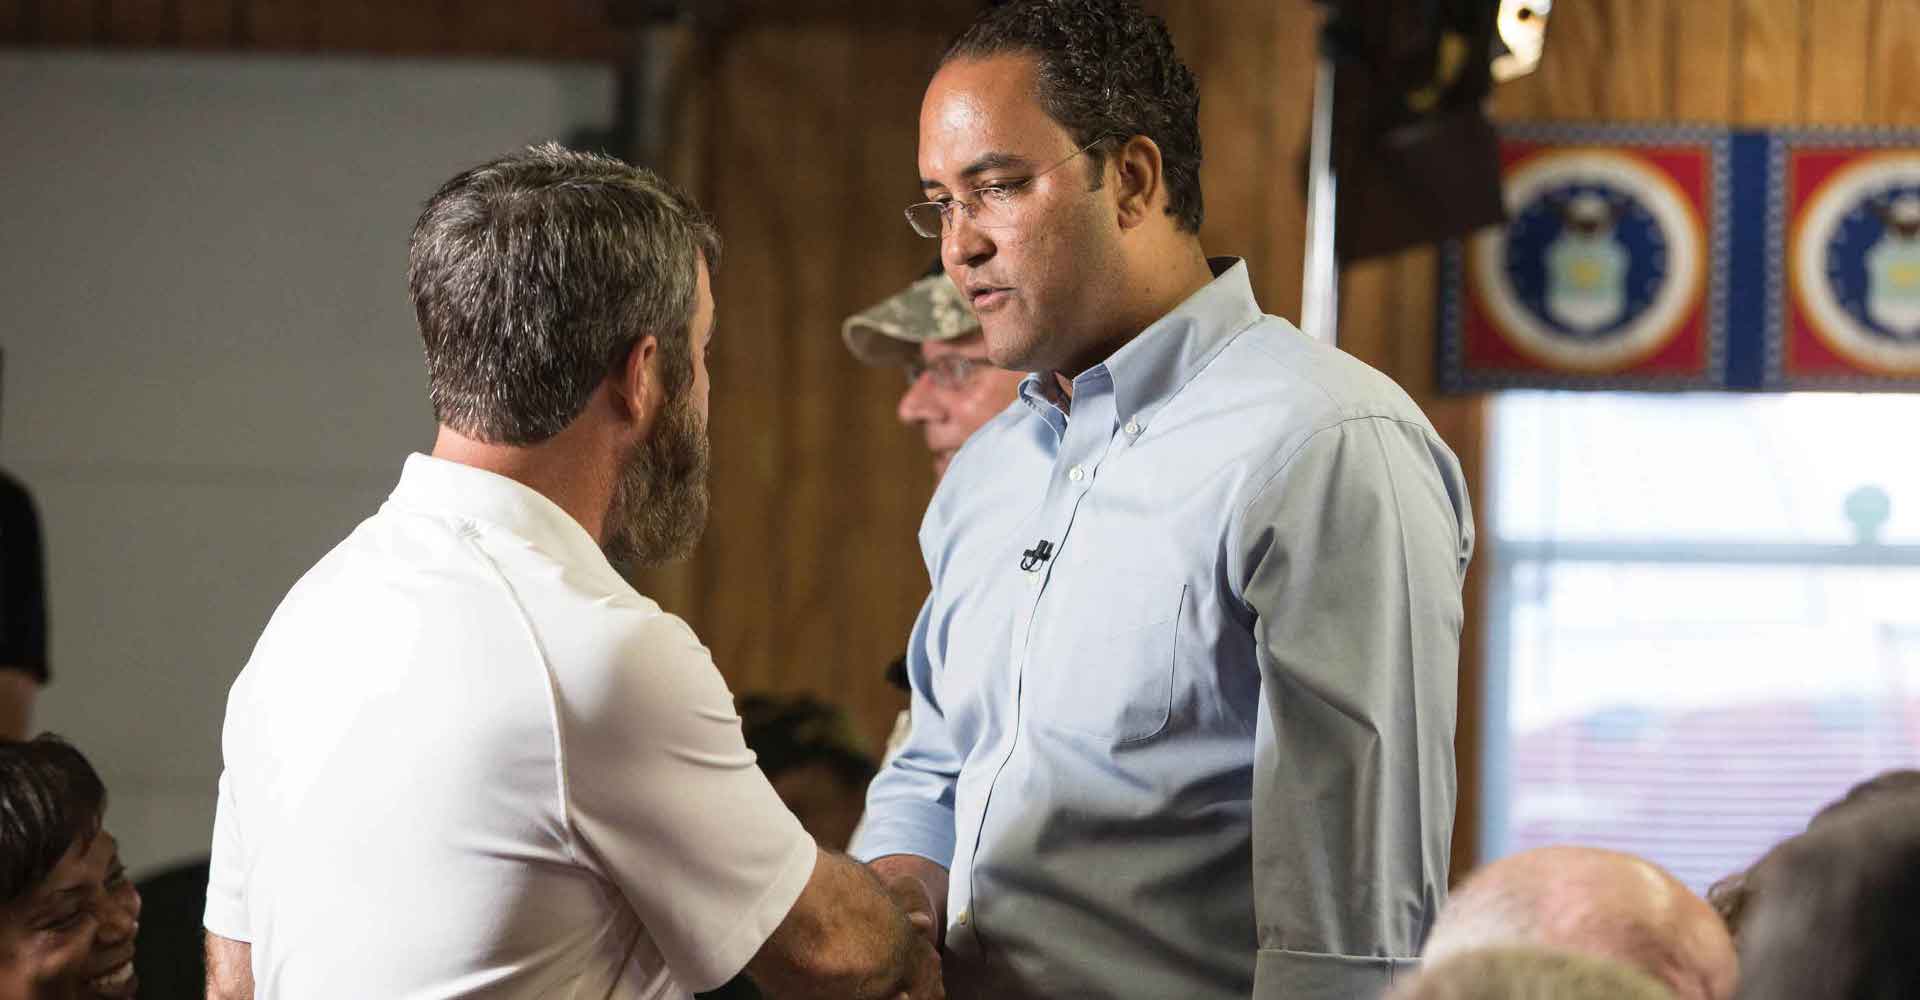 Will Hurd is shaking hands during the meeting